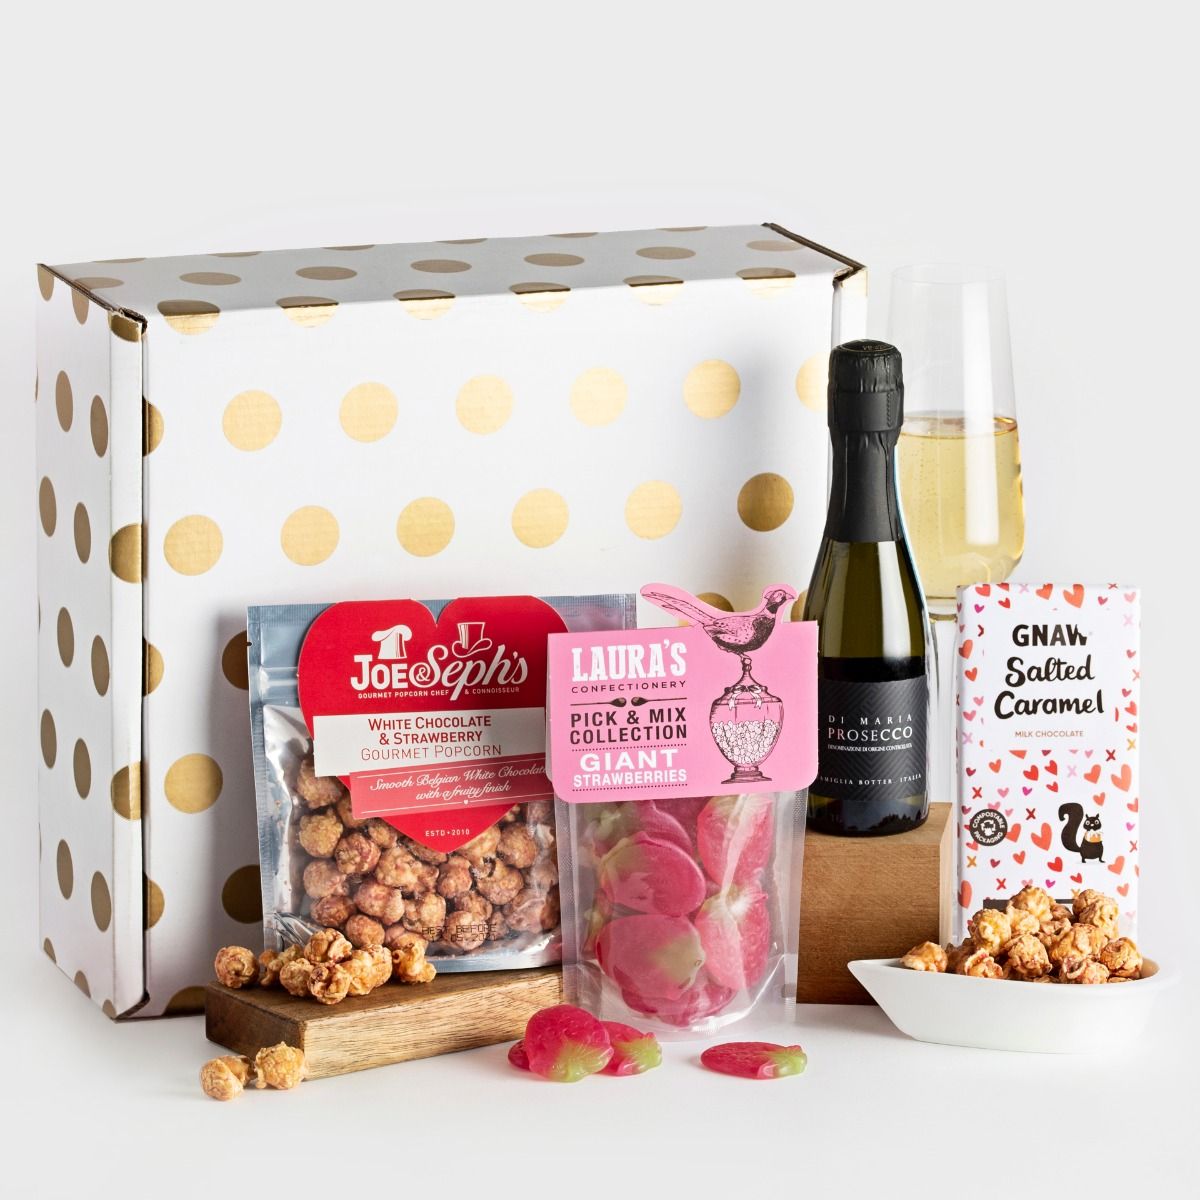 Image of prosecco and sweets gift box hamper